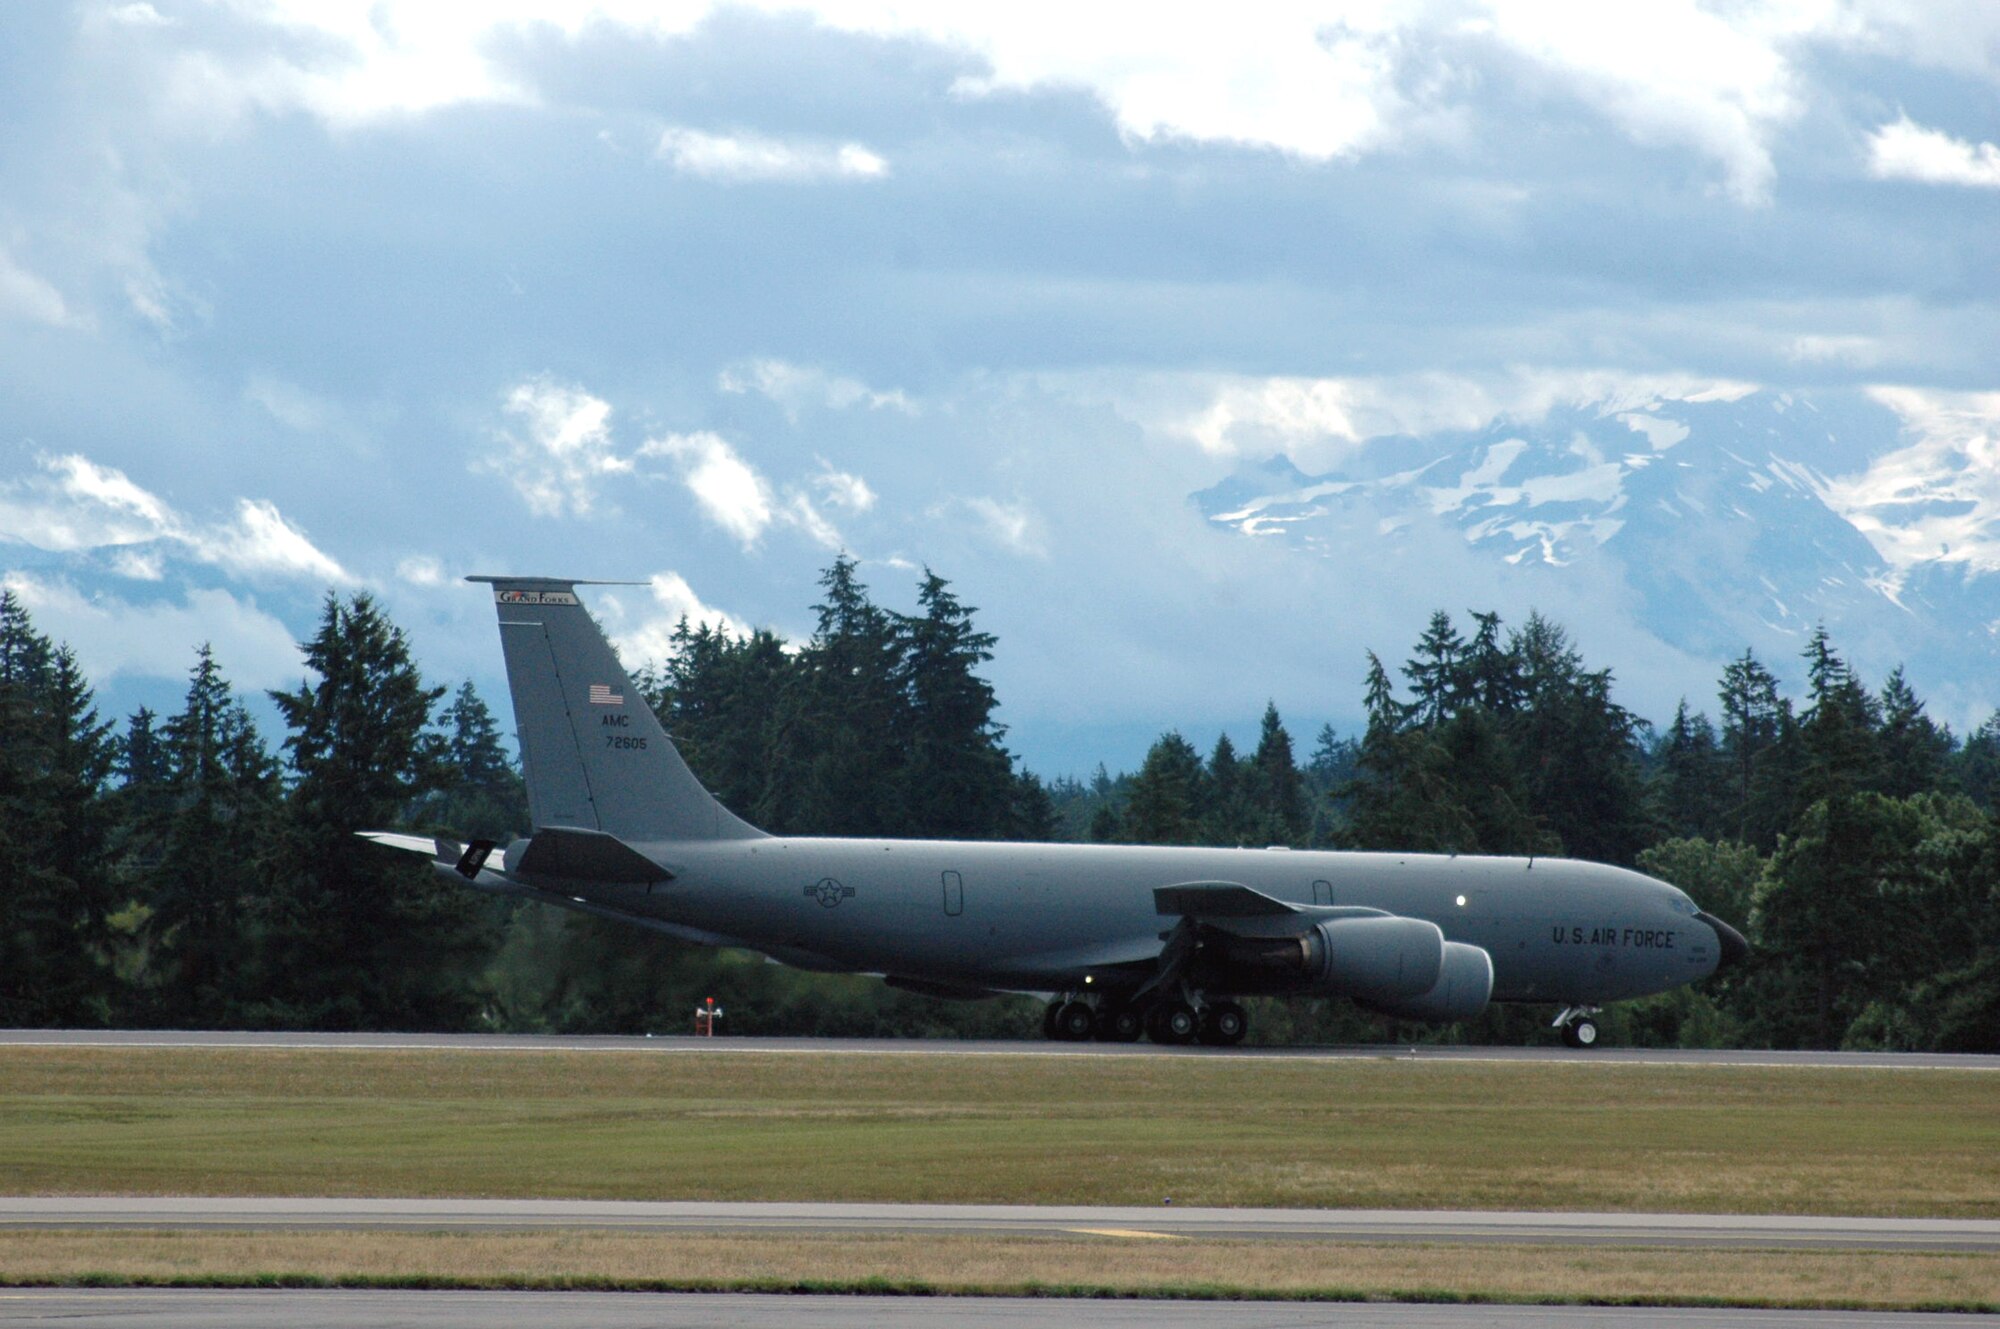 A KC-135R Stratotanker from the 319th Air Refueling Wing, Grand Forks Air Force Base, N.D., taxis after landing at McChord Air Force Base, Wash., during operations for Air Mobility Rodeo 2007, July 21.  Rodeo, sponsored by Air Mobility Command, is a readiness competition for U.S. and international mobility air forces. This competition focuses on improving world-wide mobility forces' professional core abilities. More than 40 teams and 2,500 people from the Air Force, and Air Force Reserve, as well as allied nations, are expected to participate. (U.S. Air Force Photo/Tech. Sgt. Scott T. Sturkol)